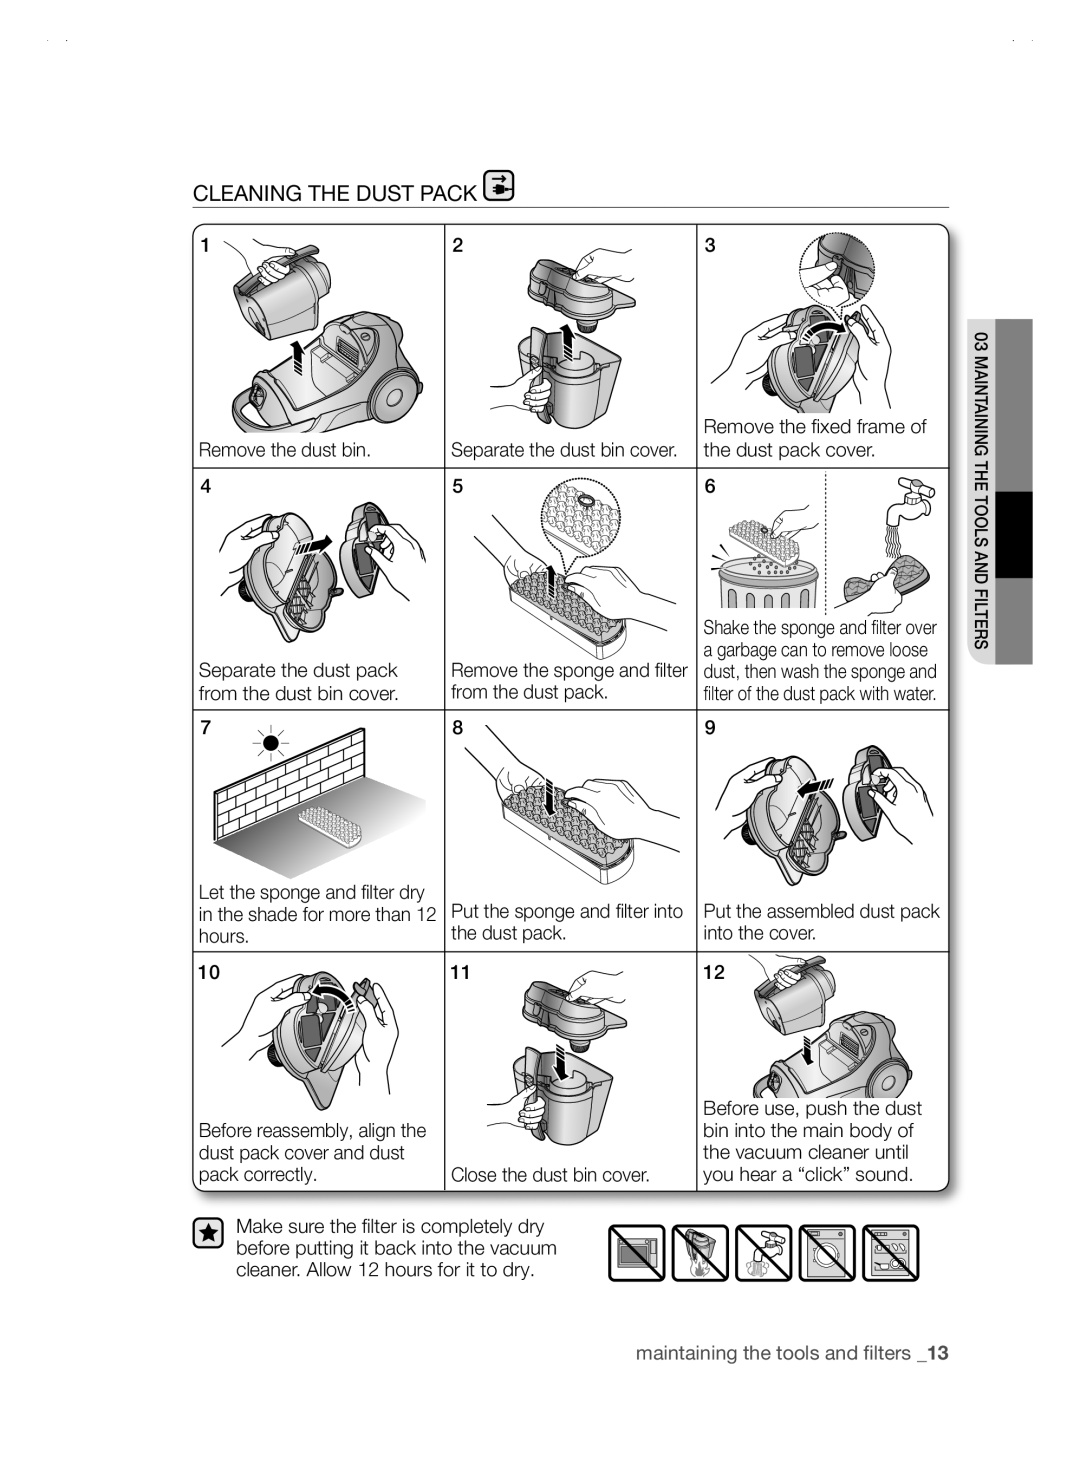 Samsung SC88P user manual Cleaning The Dust Pack, maintaining the tools and filters _13 